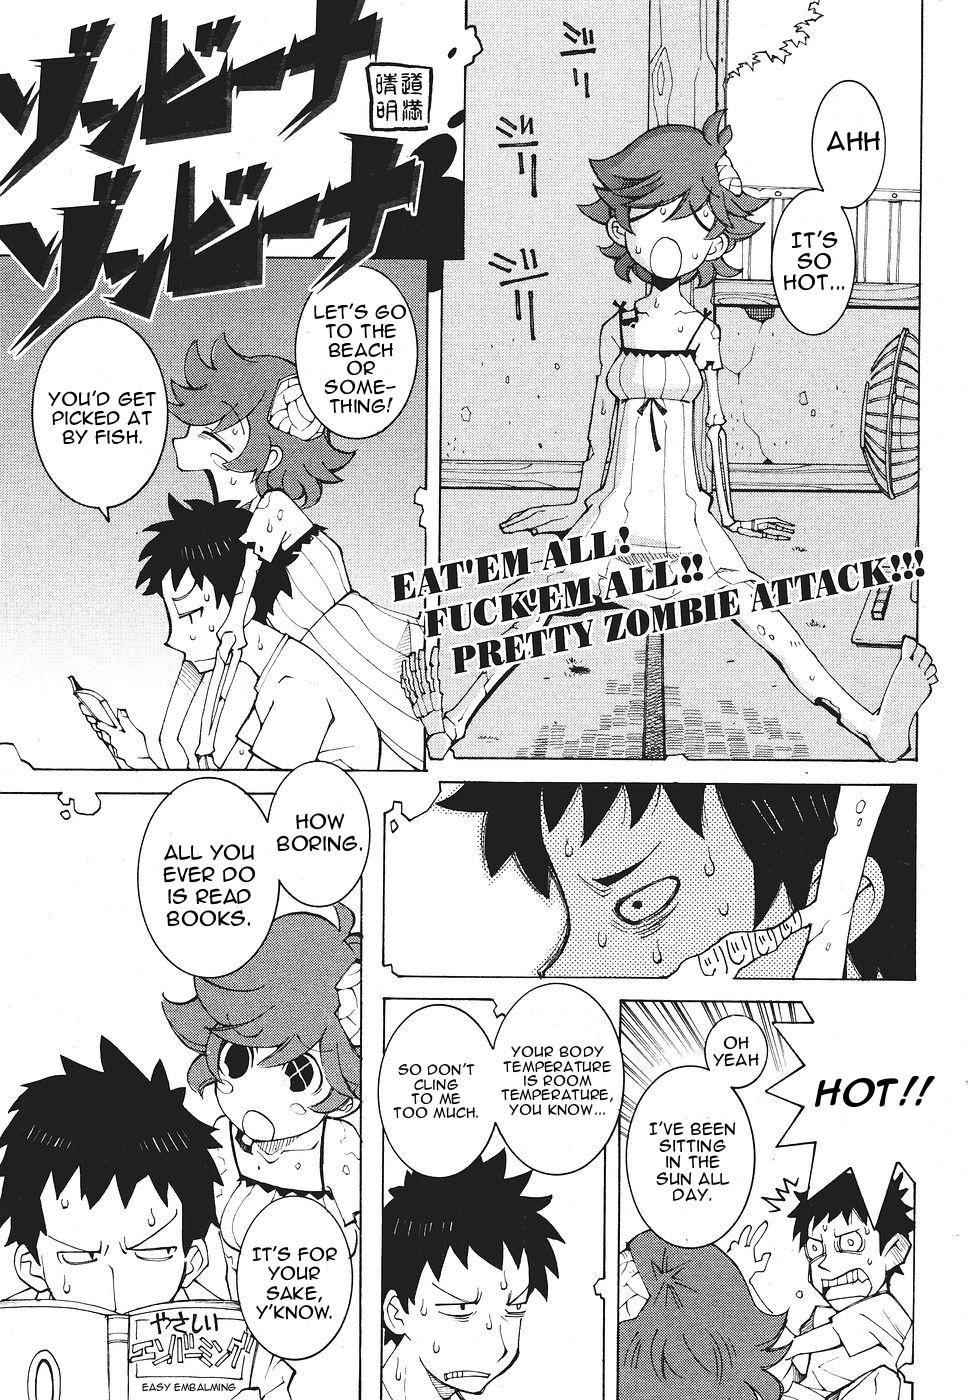 [Dowman Sayman] Eat'em All! Fuck'em All! Pretty Zombie Attack! [English] page 1 full